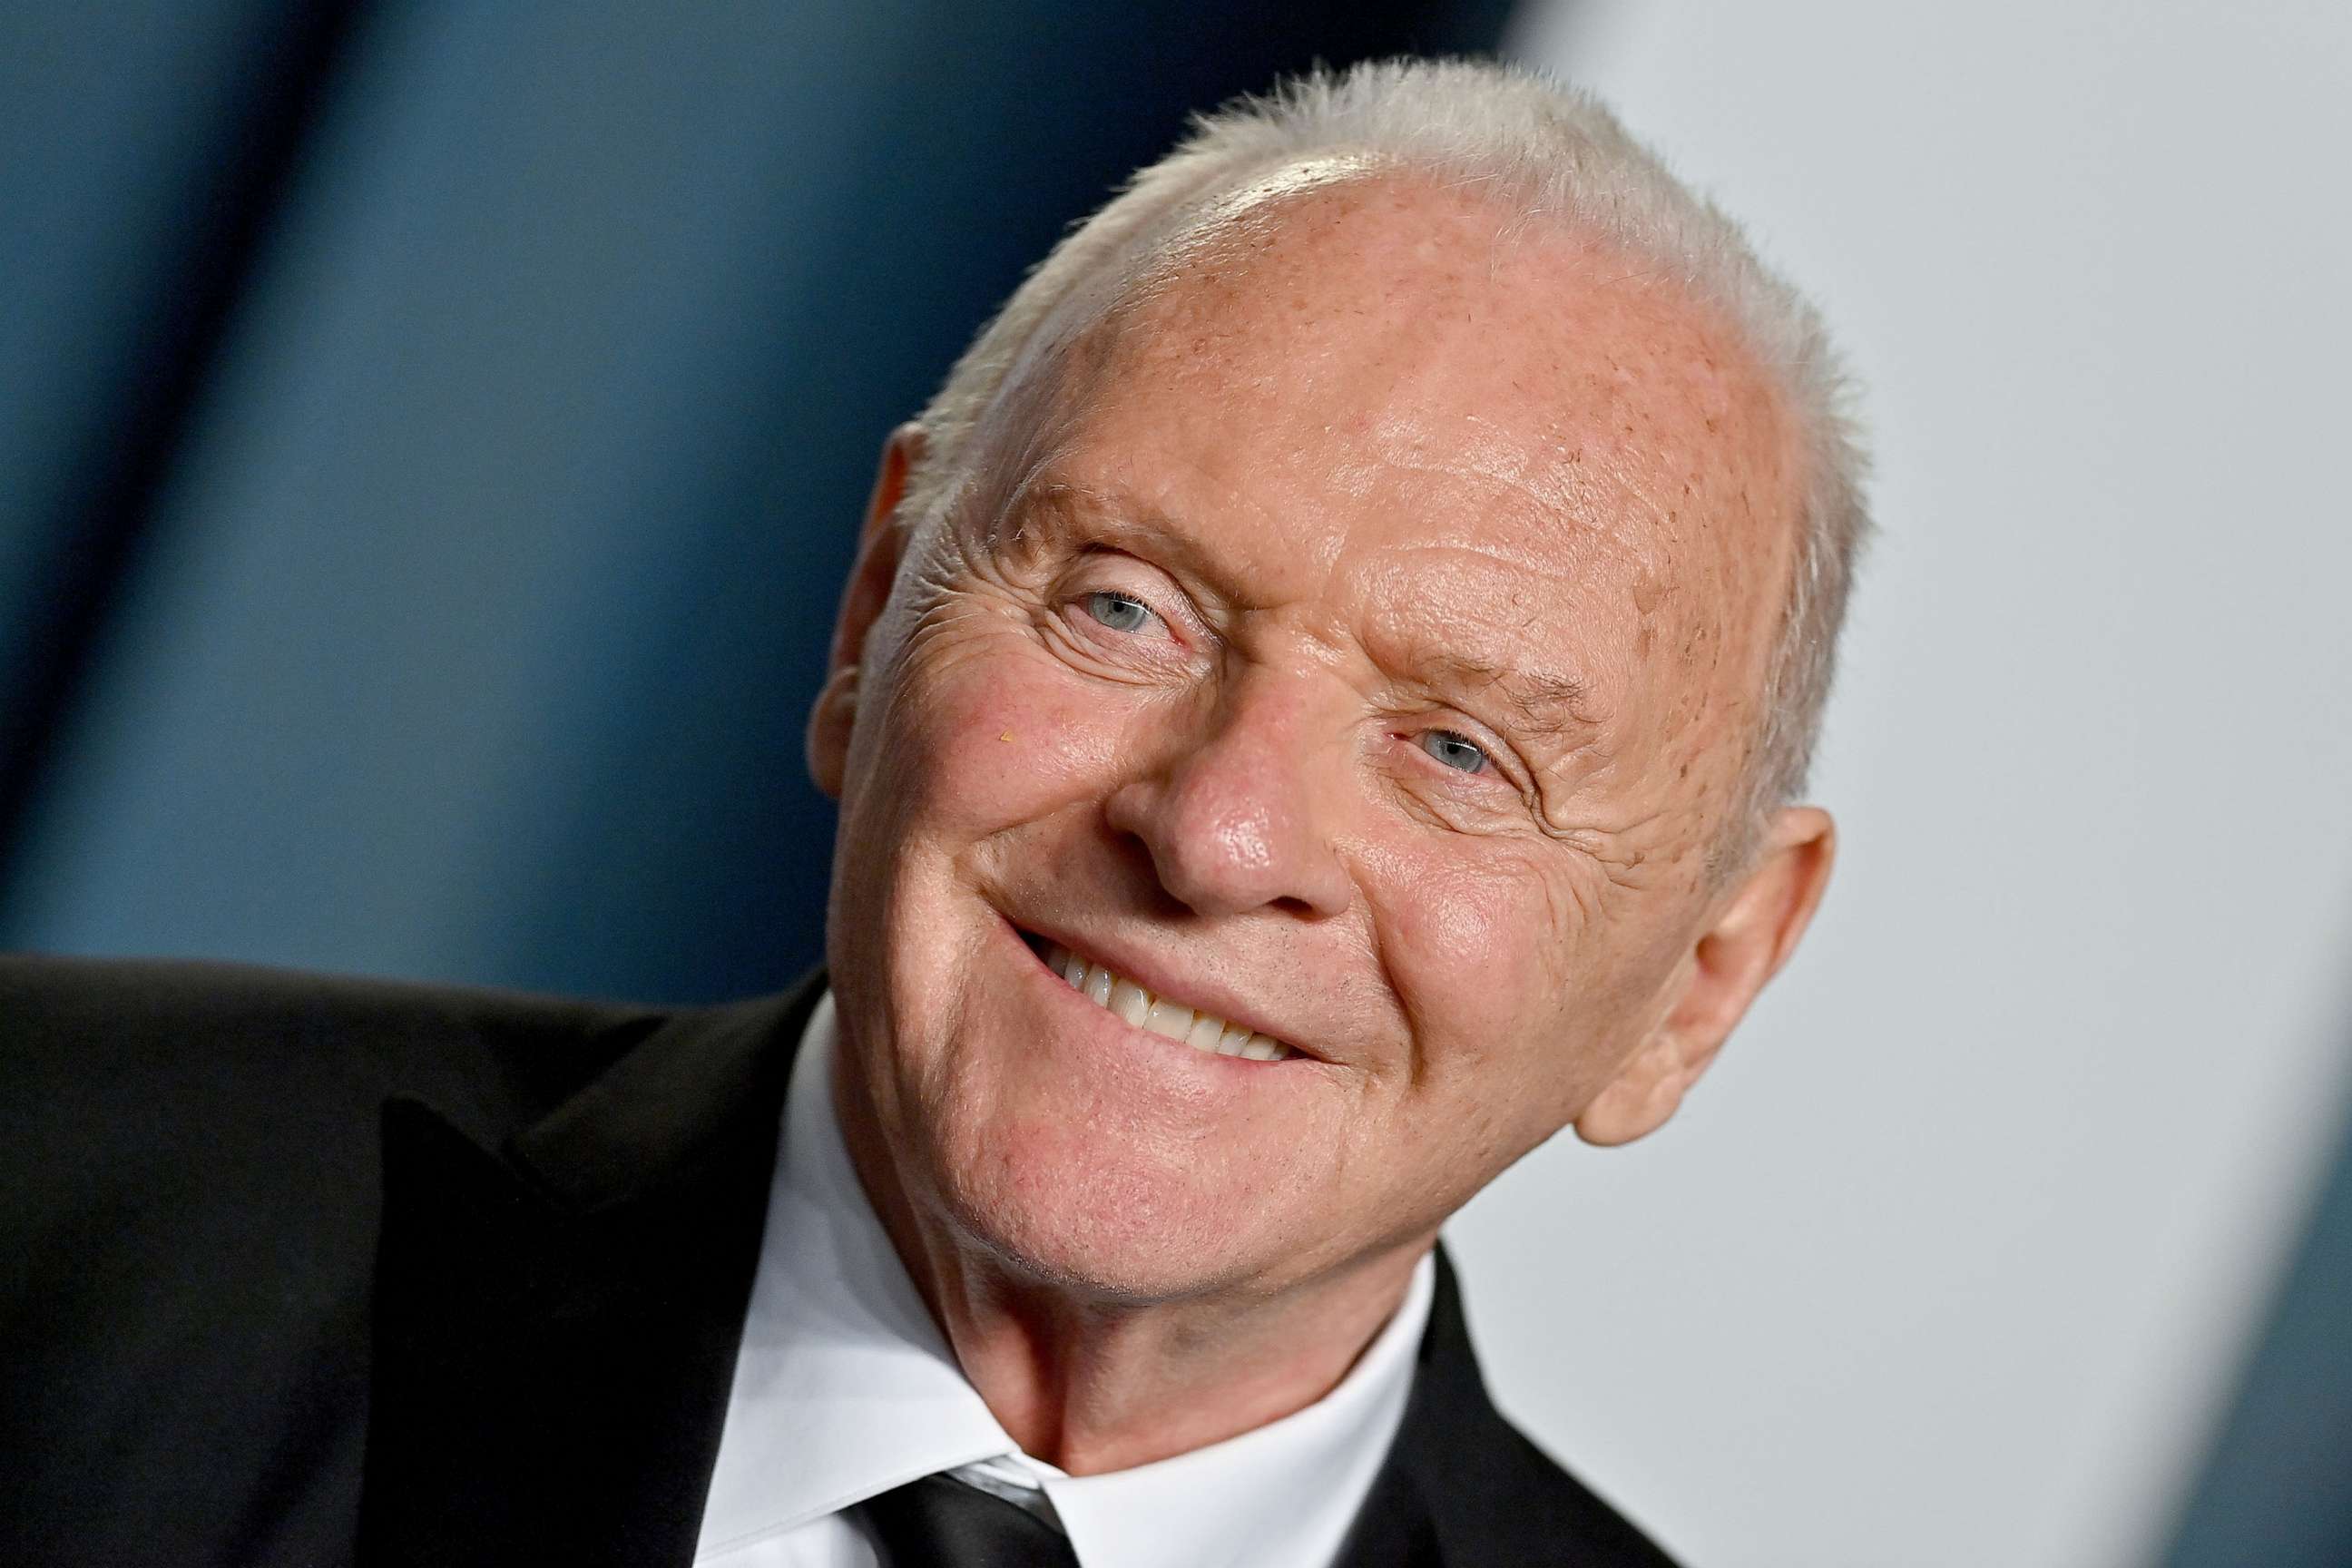 PHOTO: In this March 27, 2022, file photo, Anthony Hopkins attends the 2022 Vanity Fair Oscar Party in Beverly Hills, Calif.